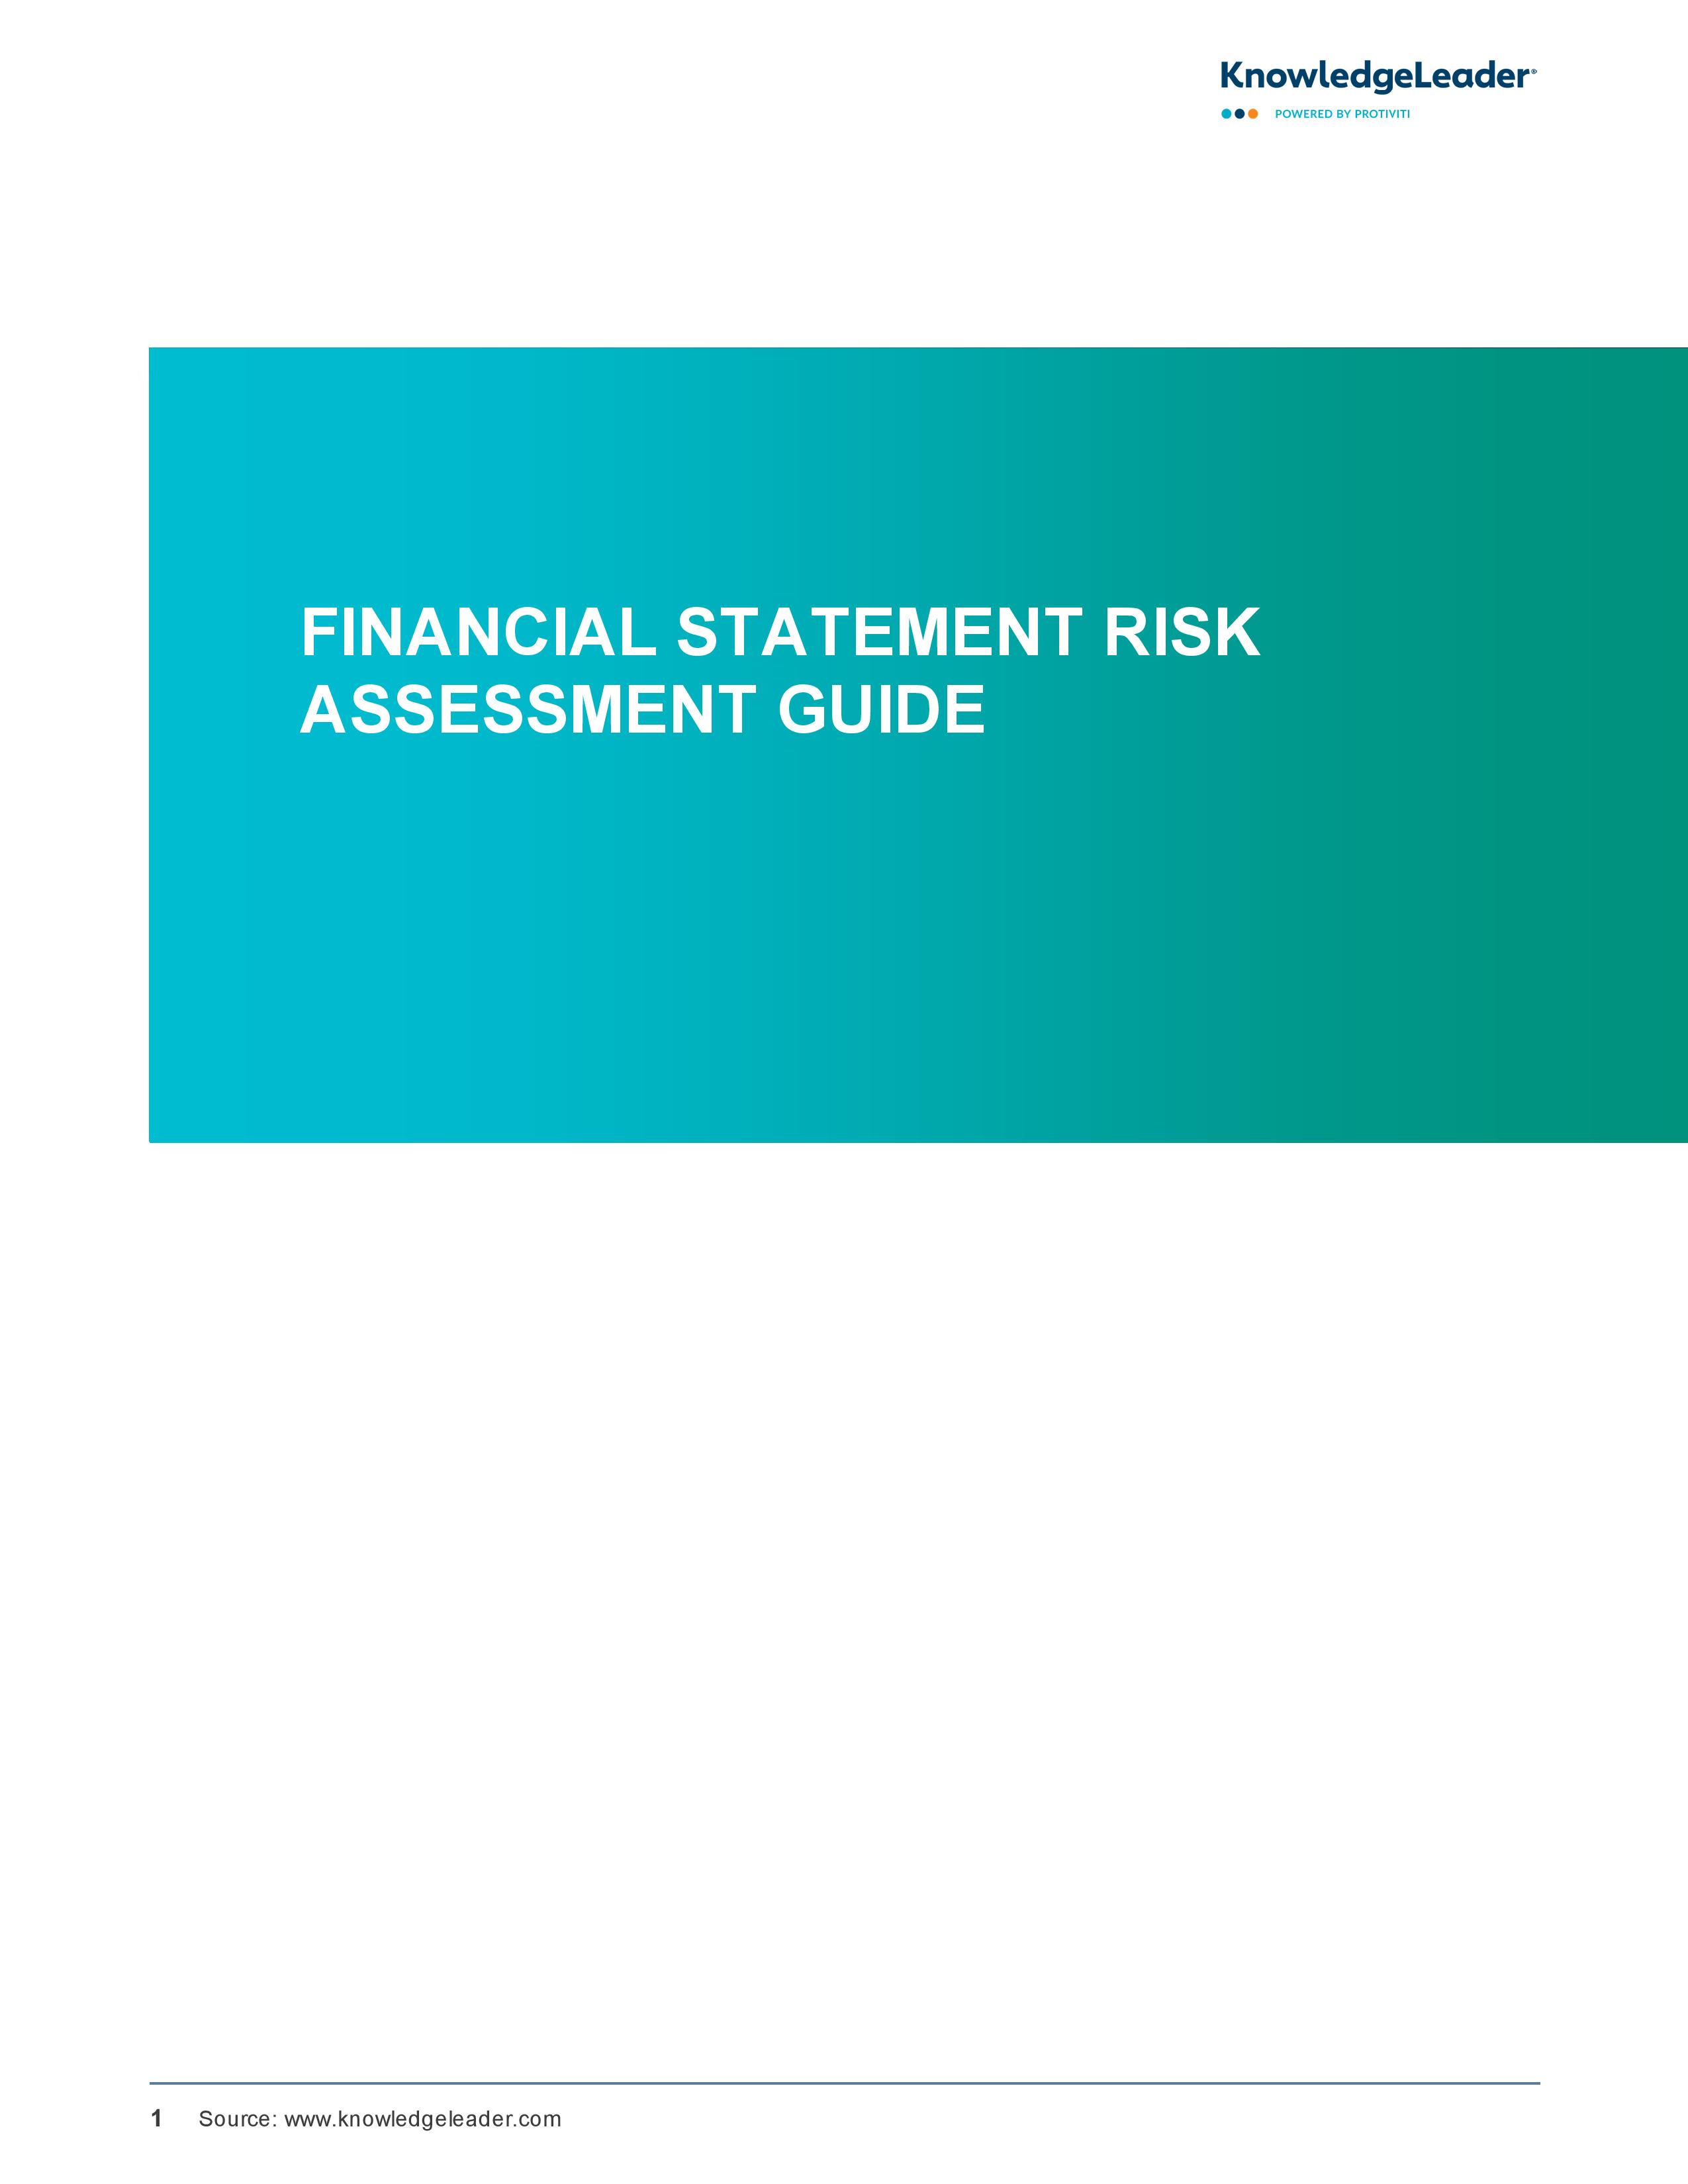 screenshot of the first page of Financial Statement Risk Assessment Guide